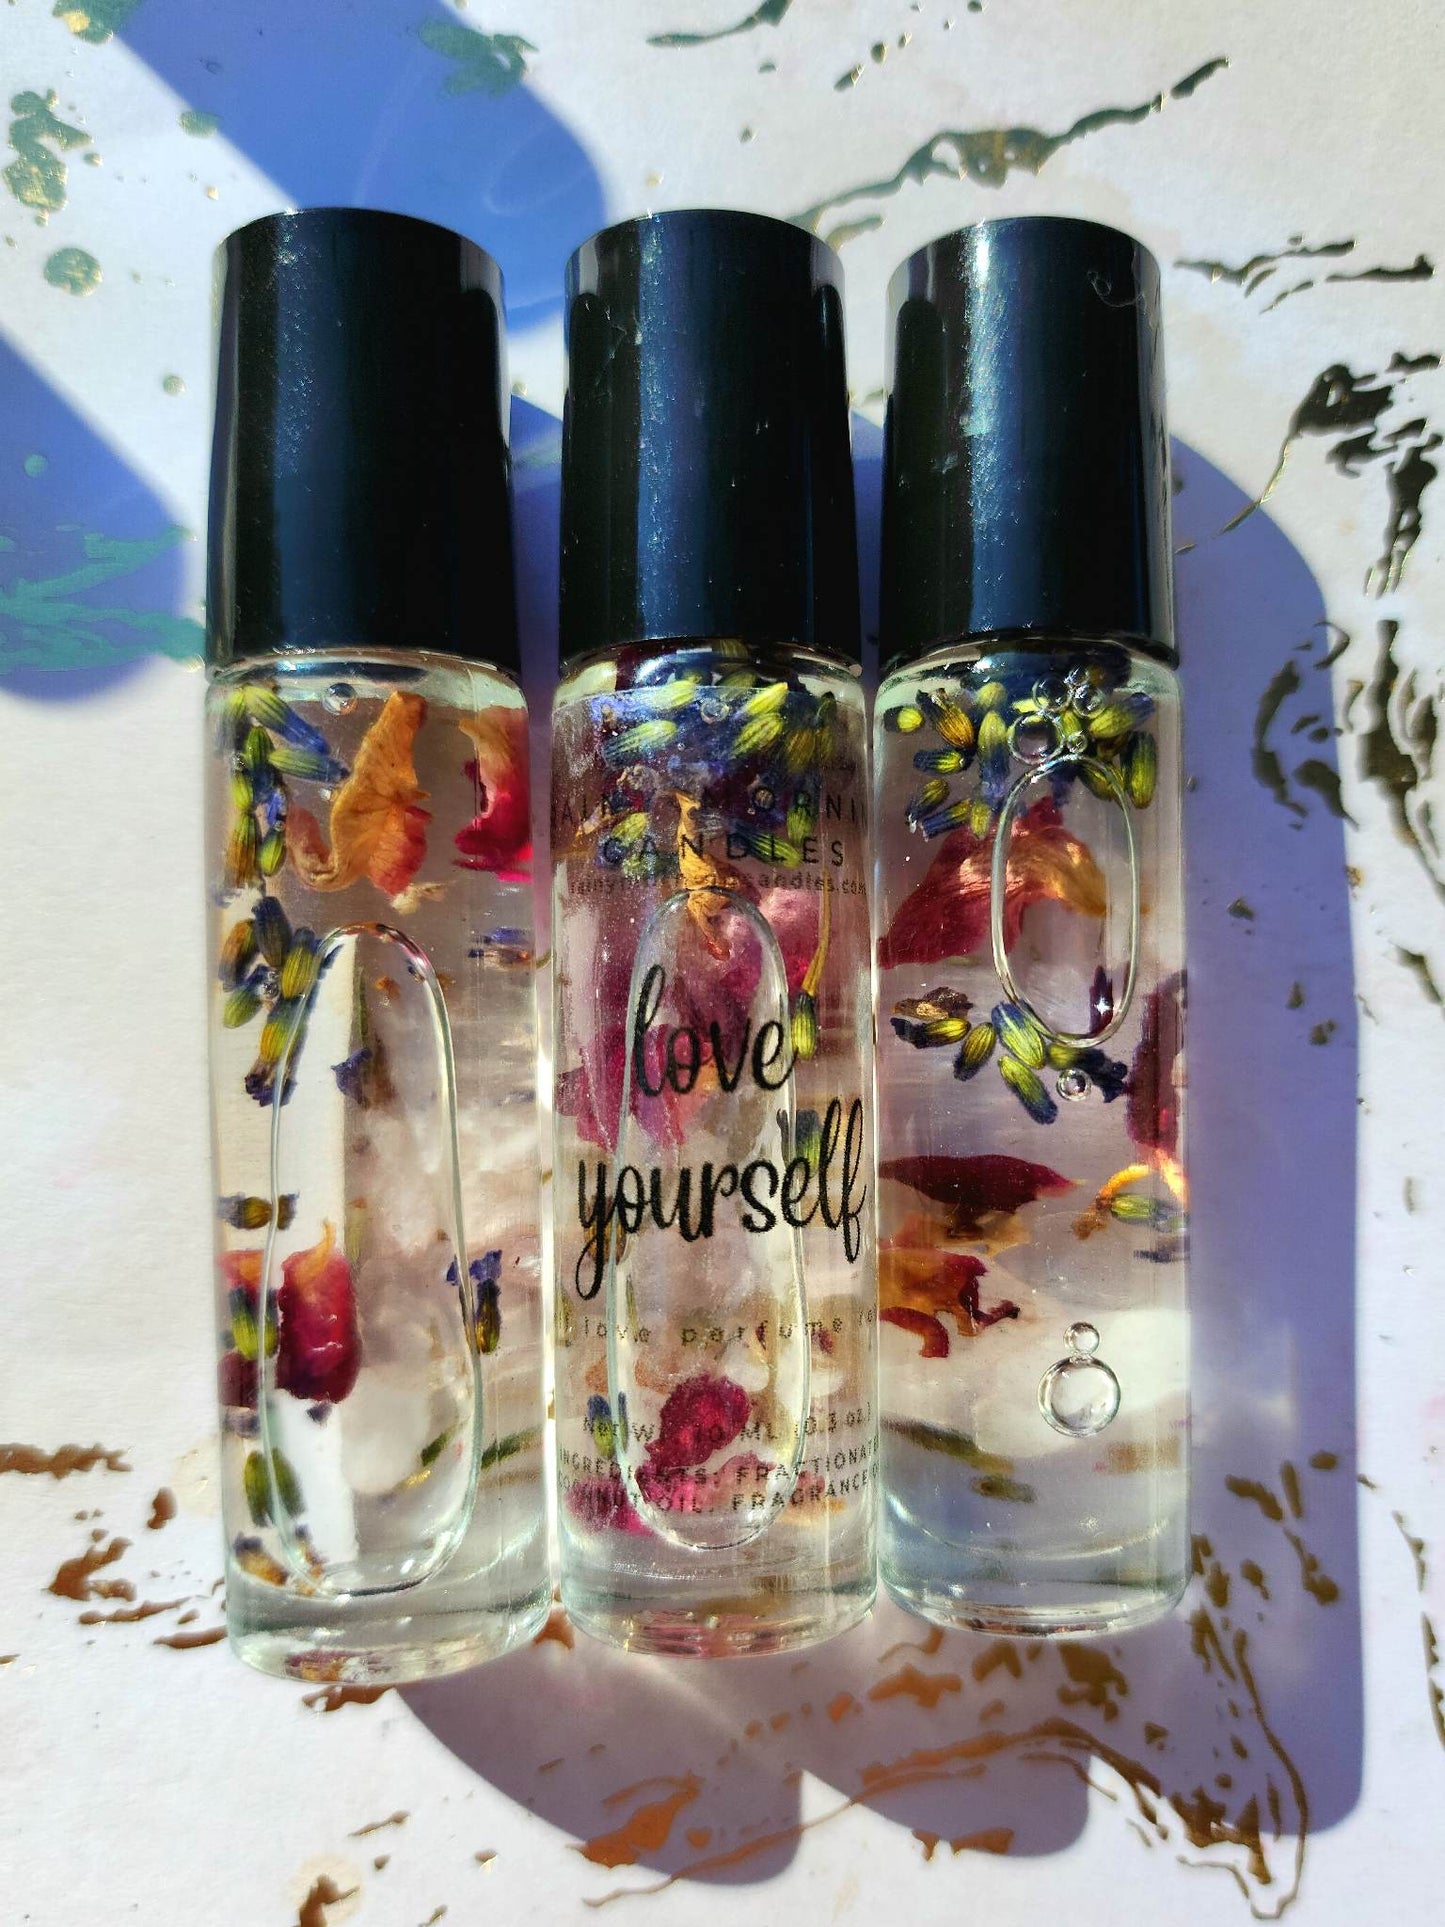 glass roller ball perfume bottles with black caps laying on white and gold background. the label on the bottle reads love yourself